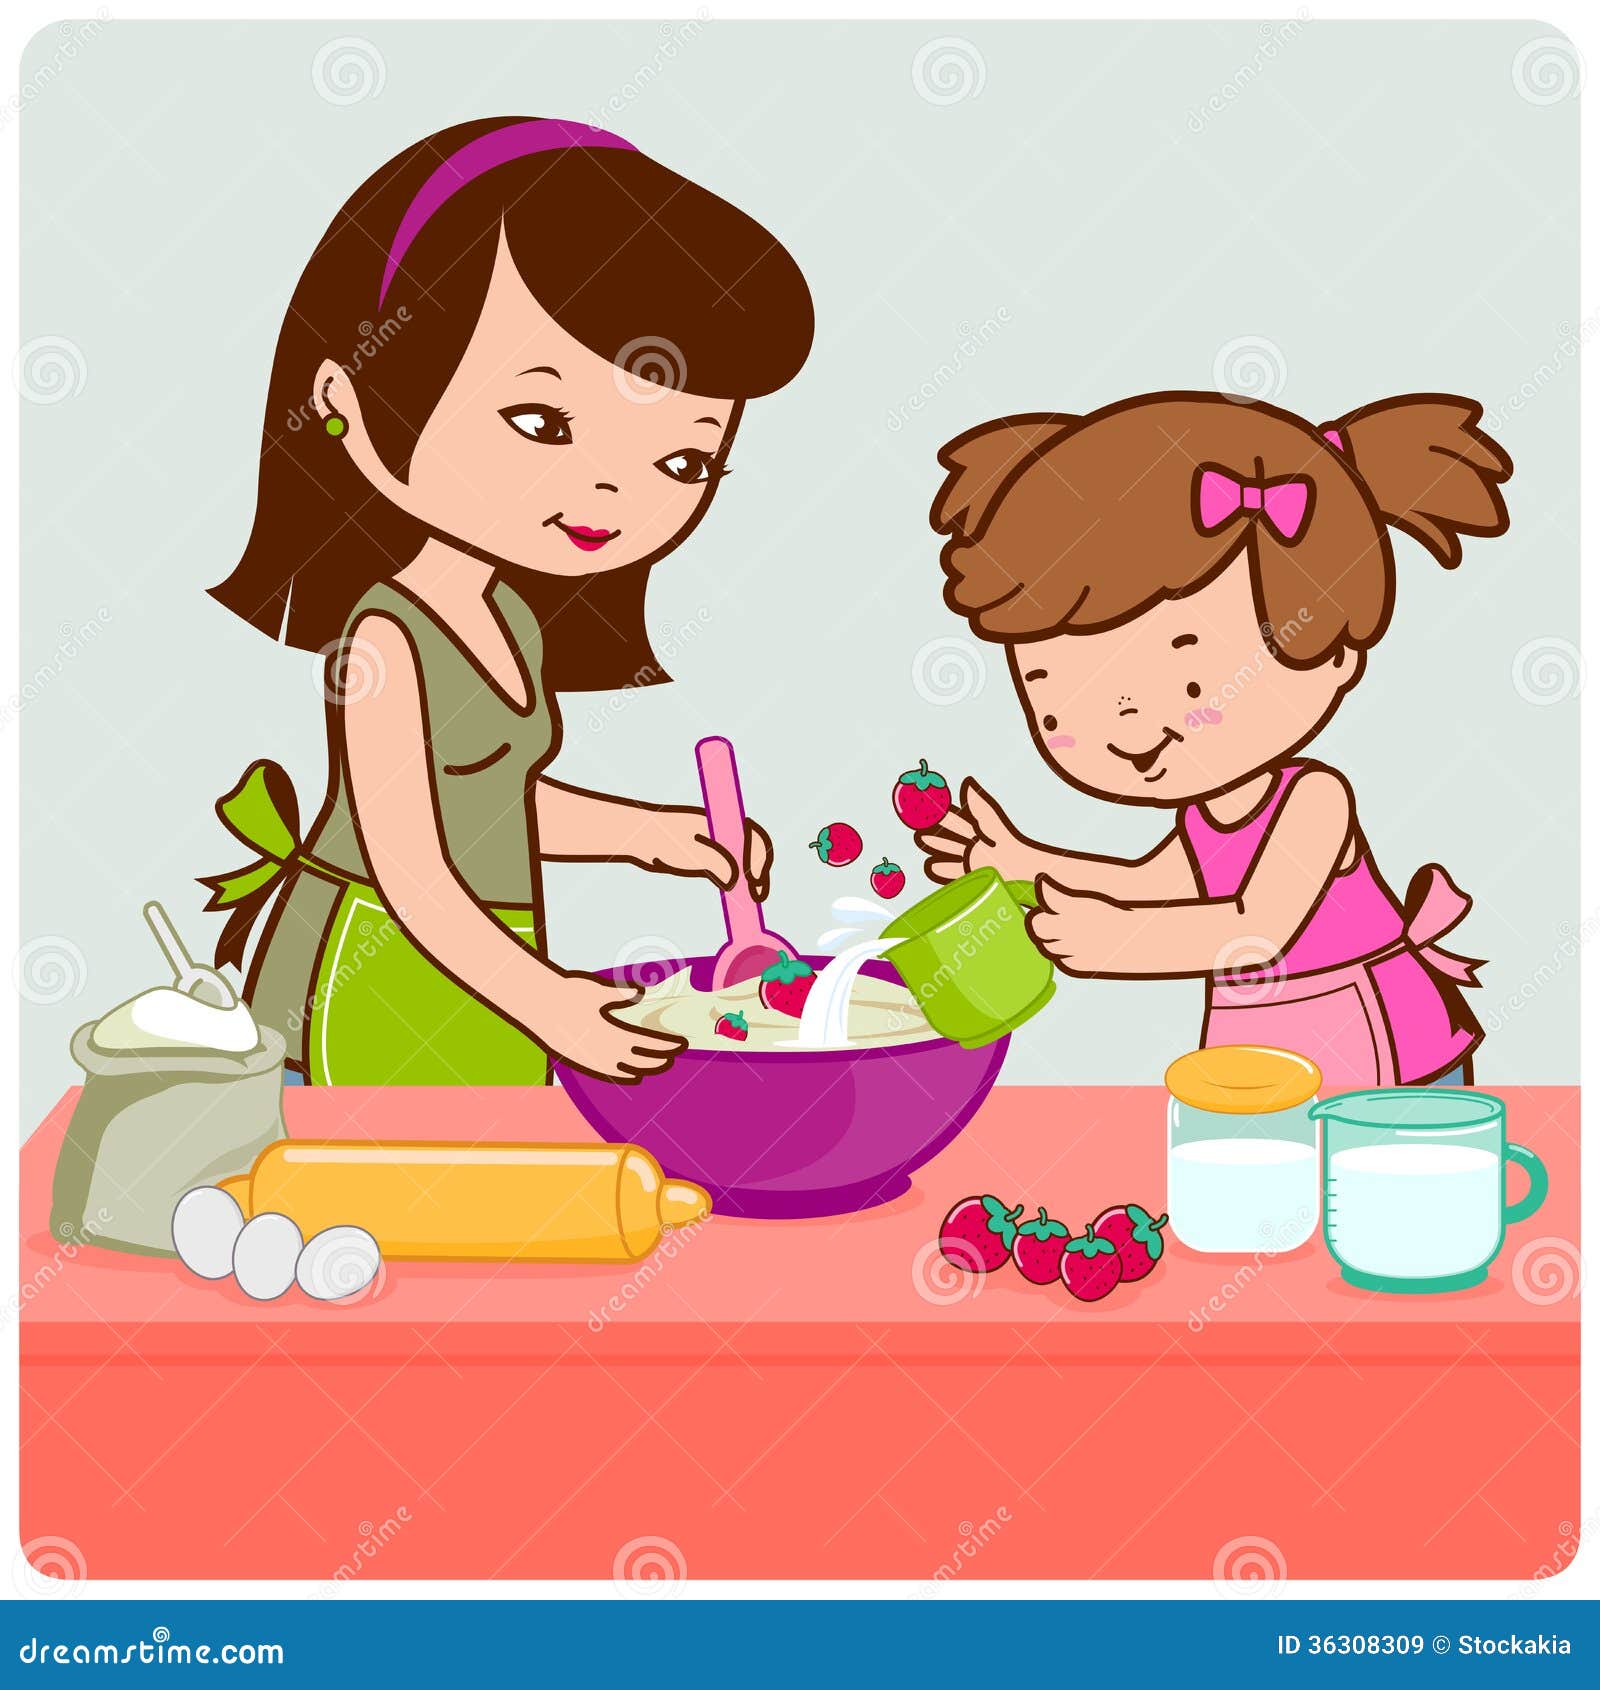 clipart of mother cooking - photo #7